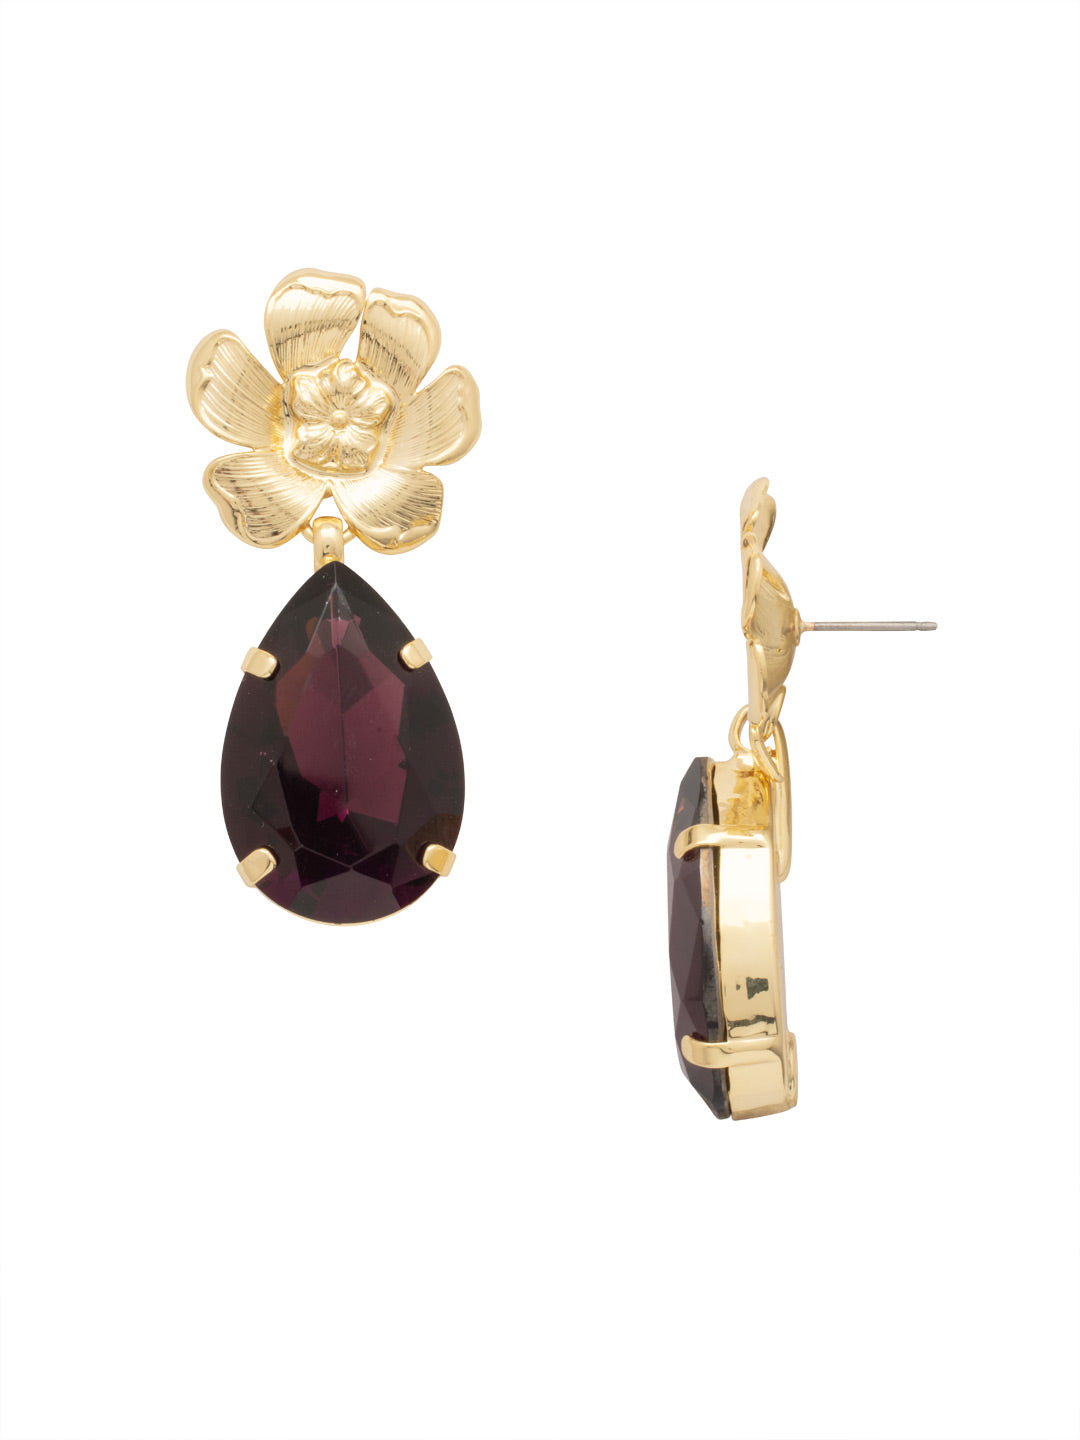 Fleur Statement Earrings - EFL11BGMRL - <p>The Fleur Statement Earrings feature a large pear-cut crystal dangling from a flower metal charm on a post. From Sorrelli's Merlot collection in our Bright Gold-tone finish.</p>